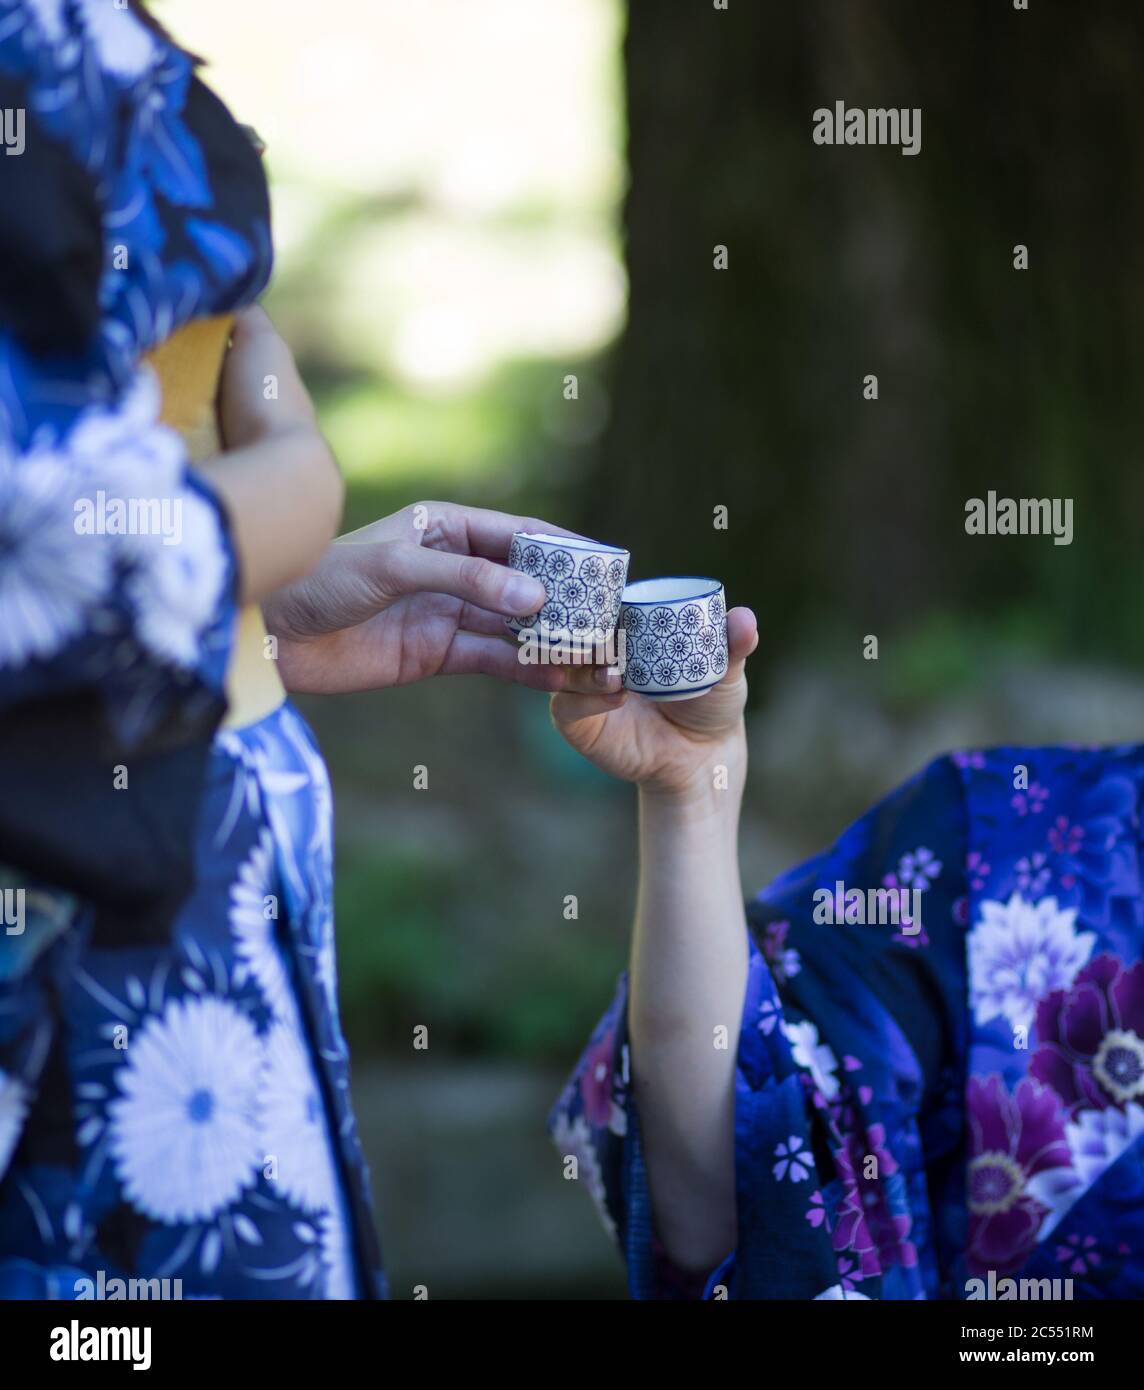 Vertical shot of two women in kimono robes banging teacups on a background of nature Stock Photo